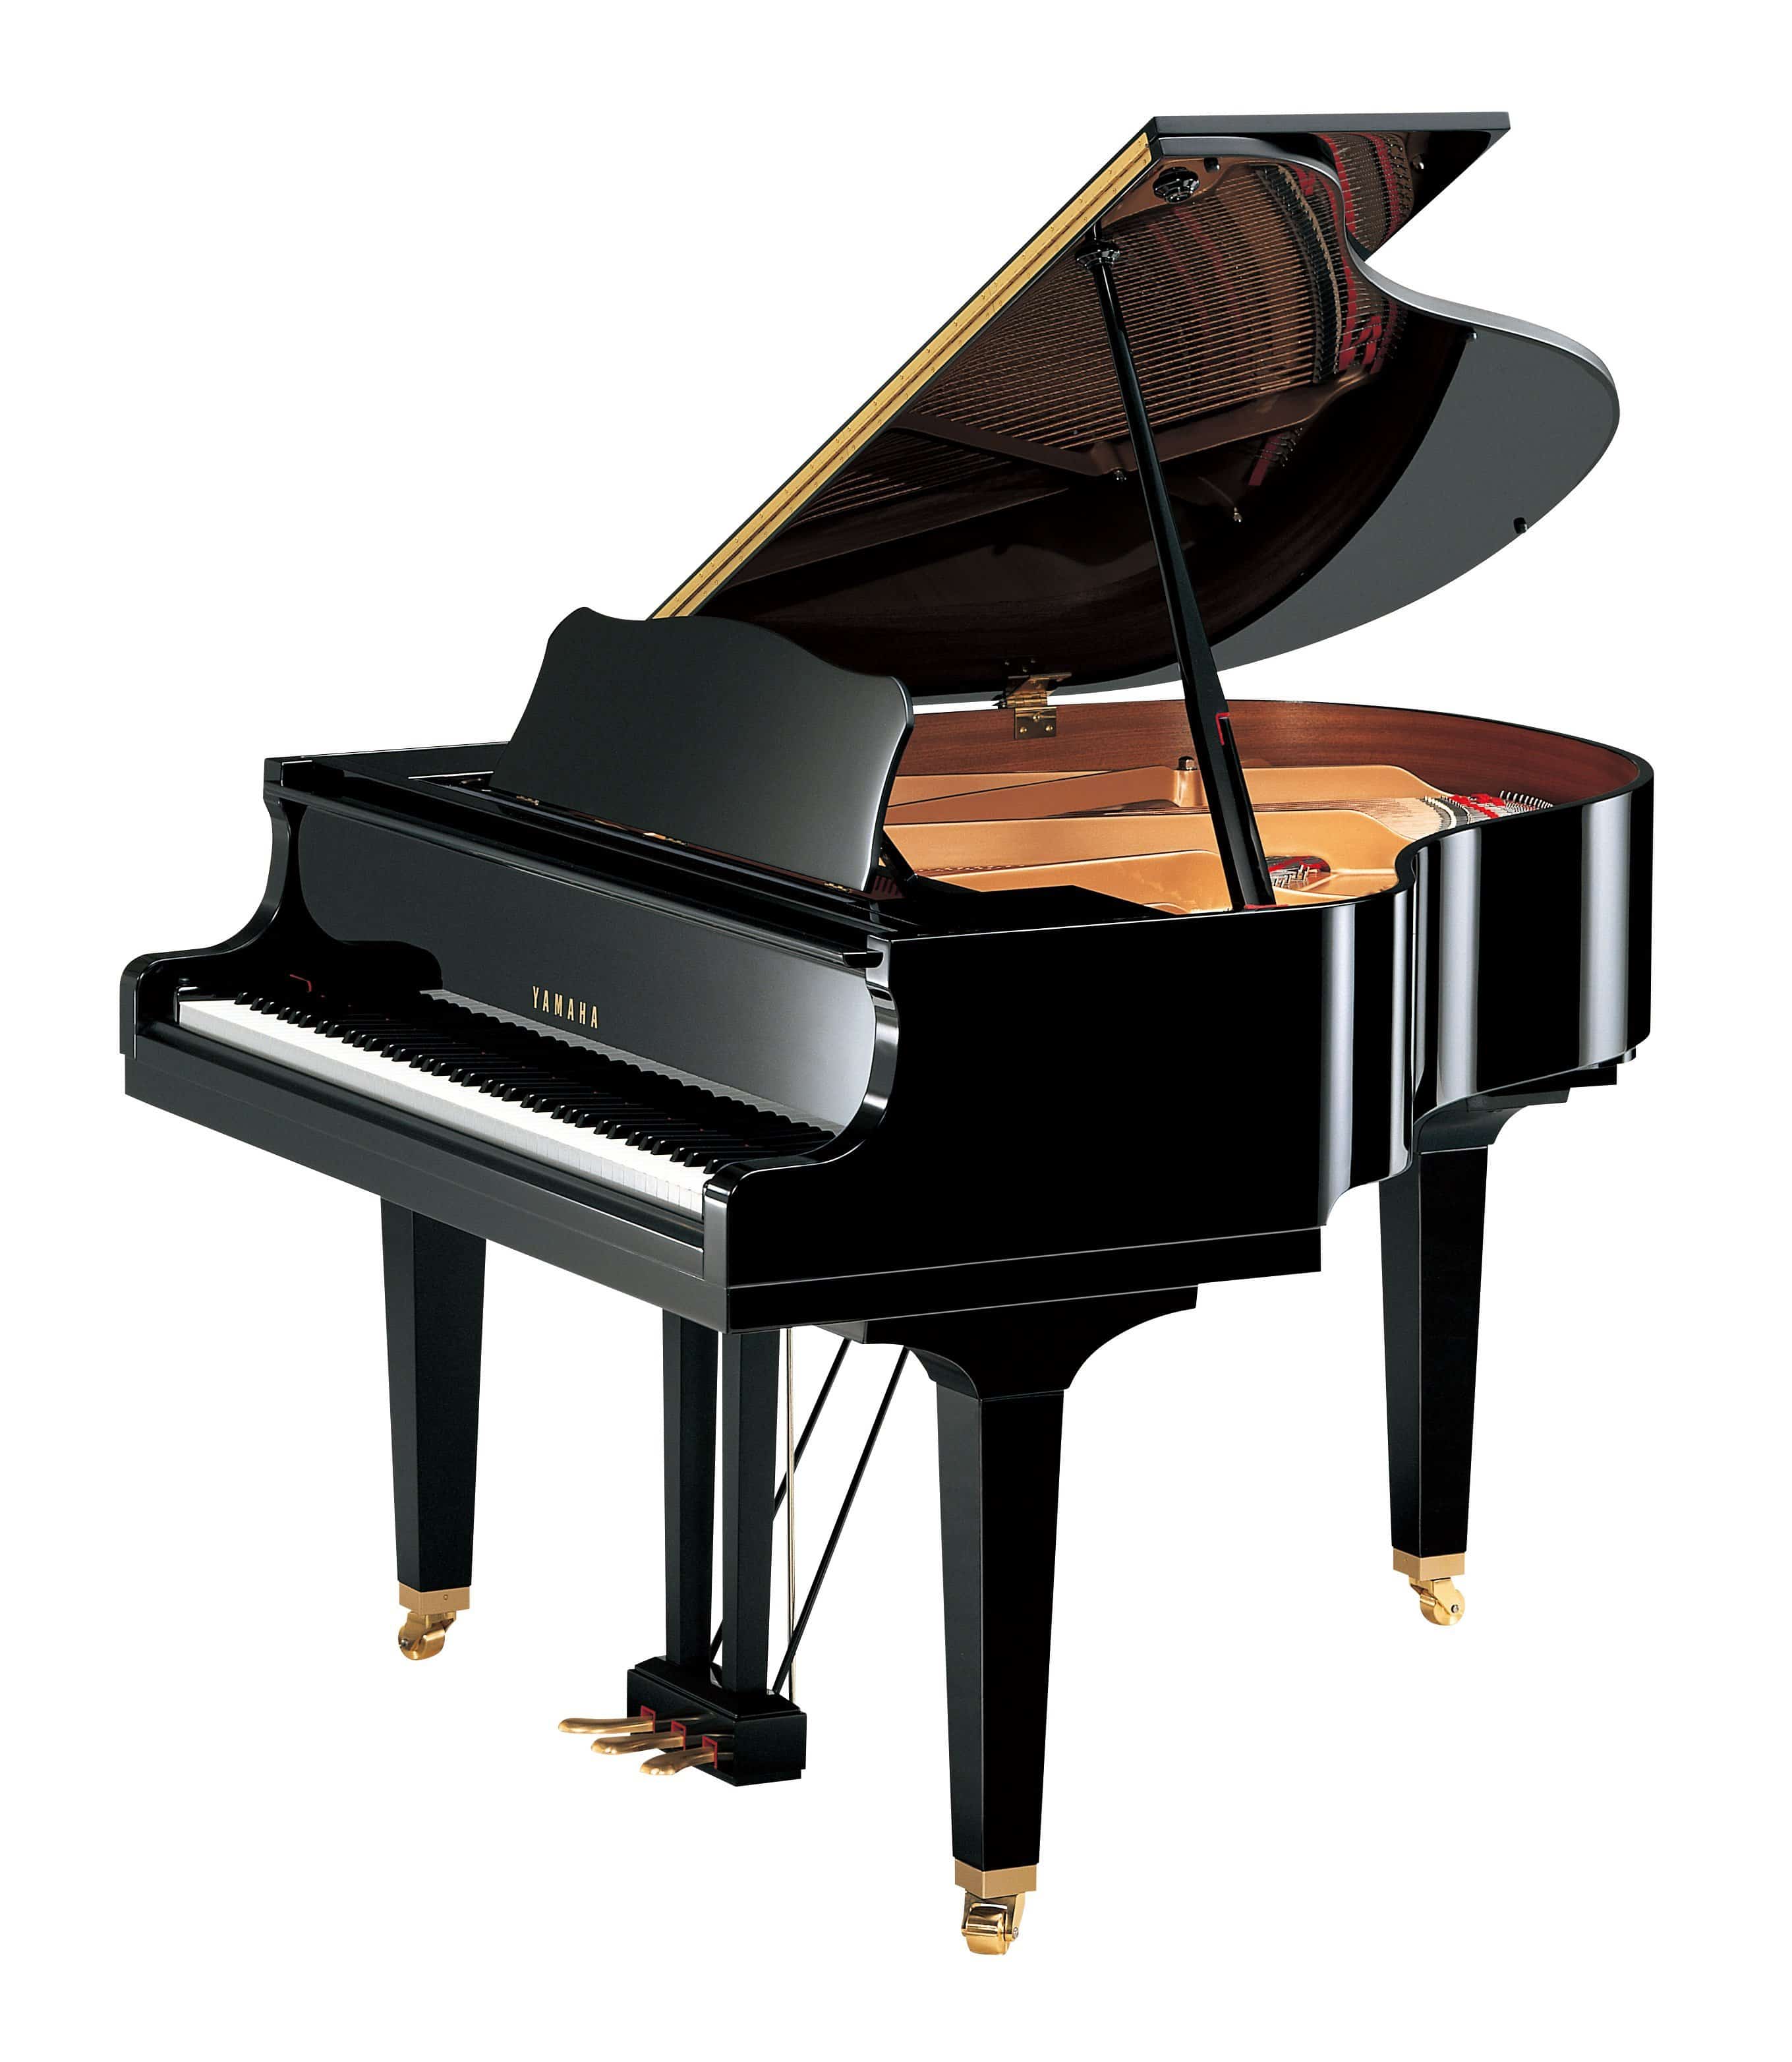 New Grand Pianos for Sale